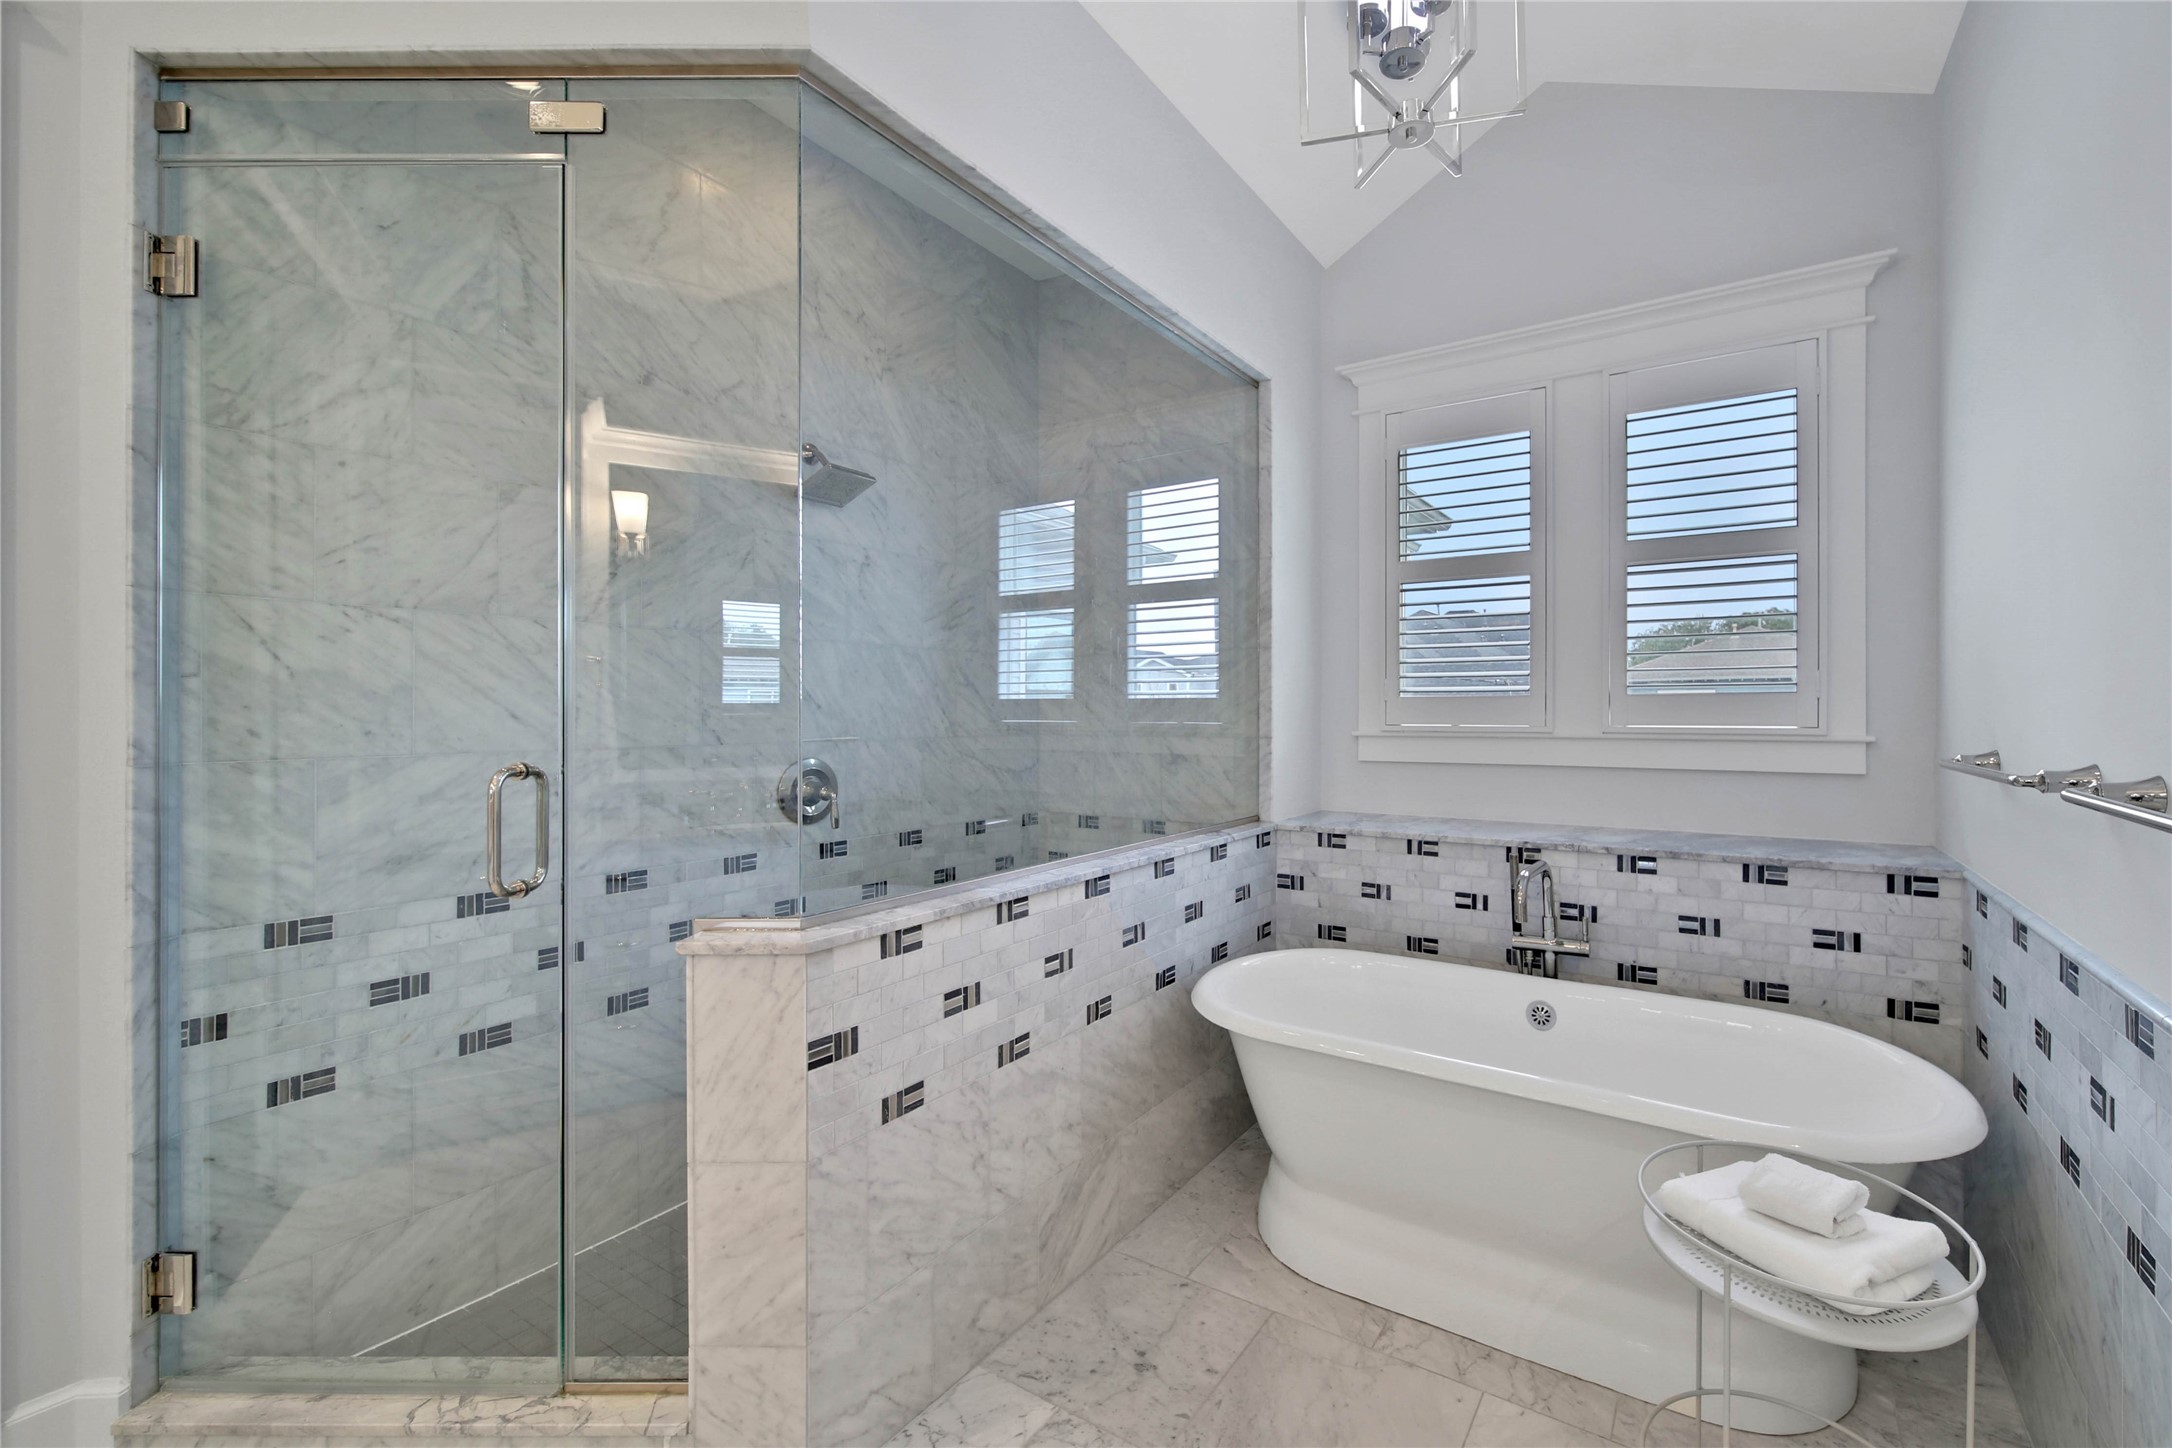 Experience luxury and relaxation in the primary bathroom, featuring a spacious walk-in glass shower and a soothing tub.